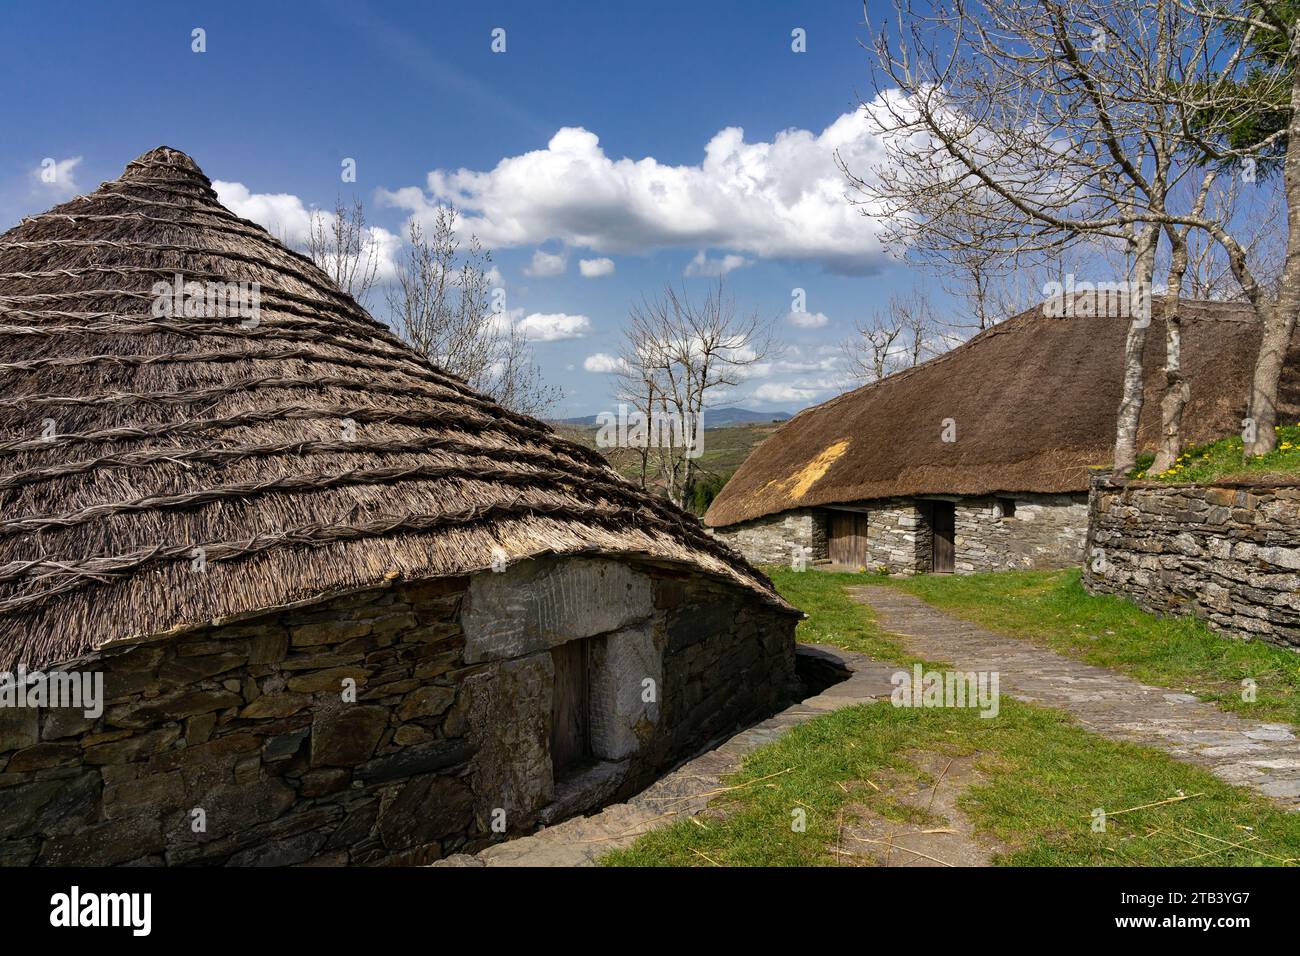 Traditional houses called pallozas with their thatched roofs in the beautiful village of O Cebreiro, which is a cr Stock Photo